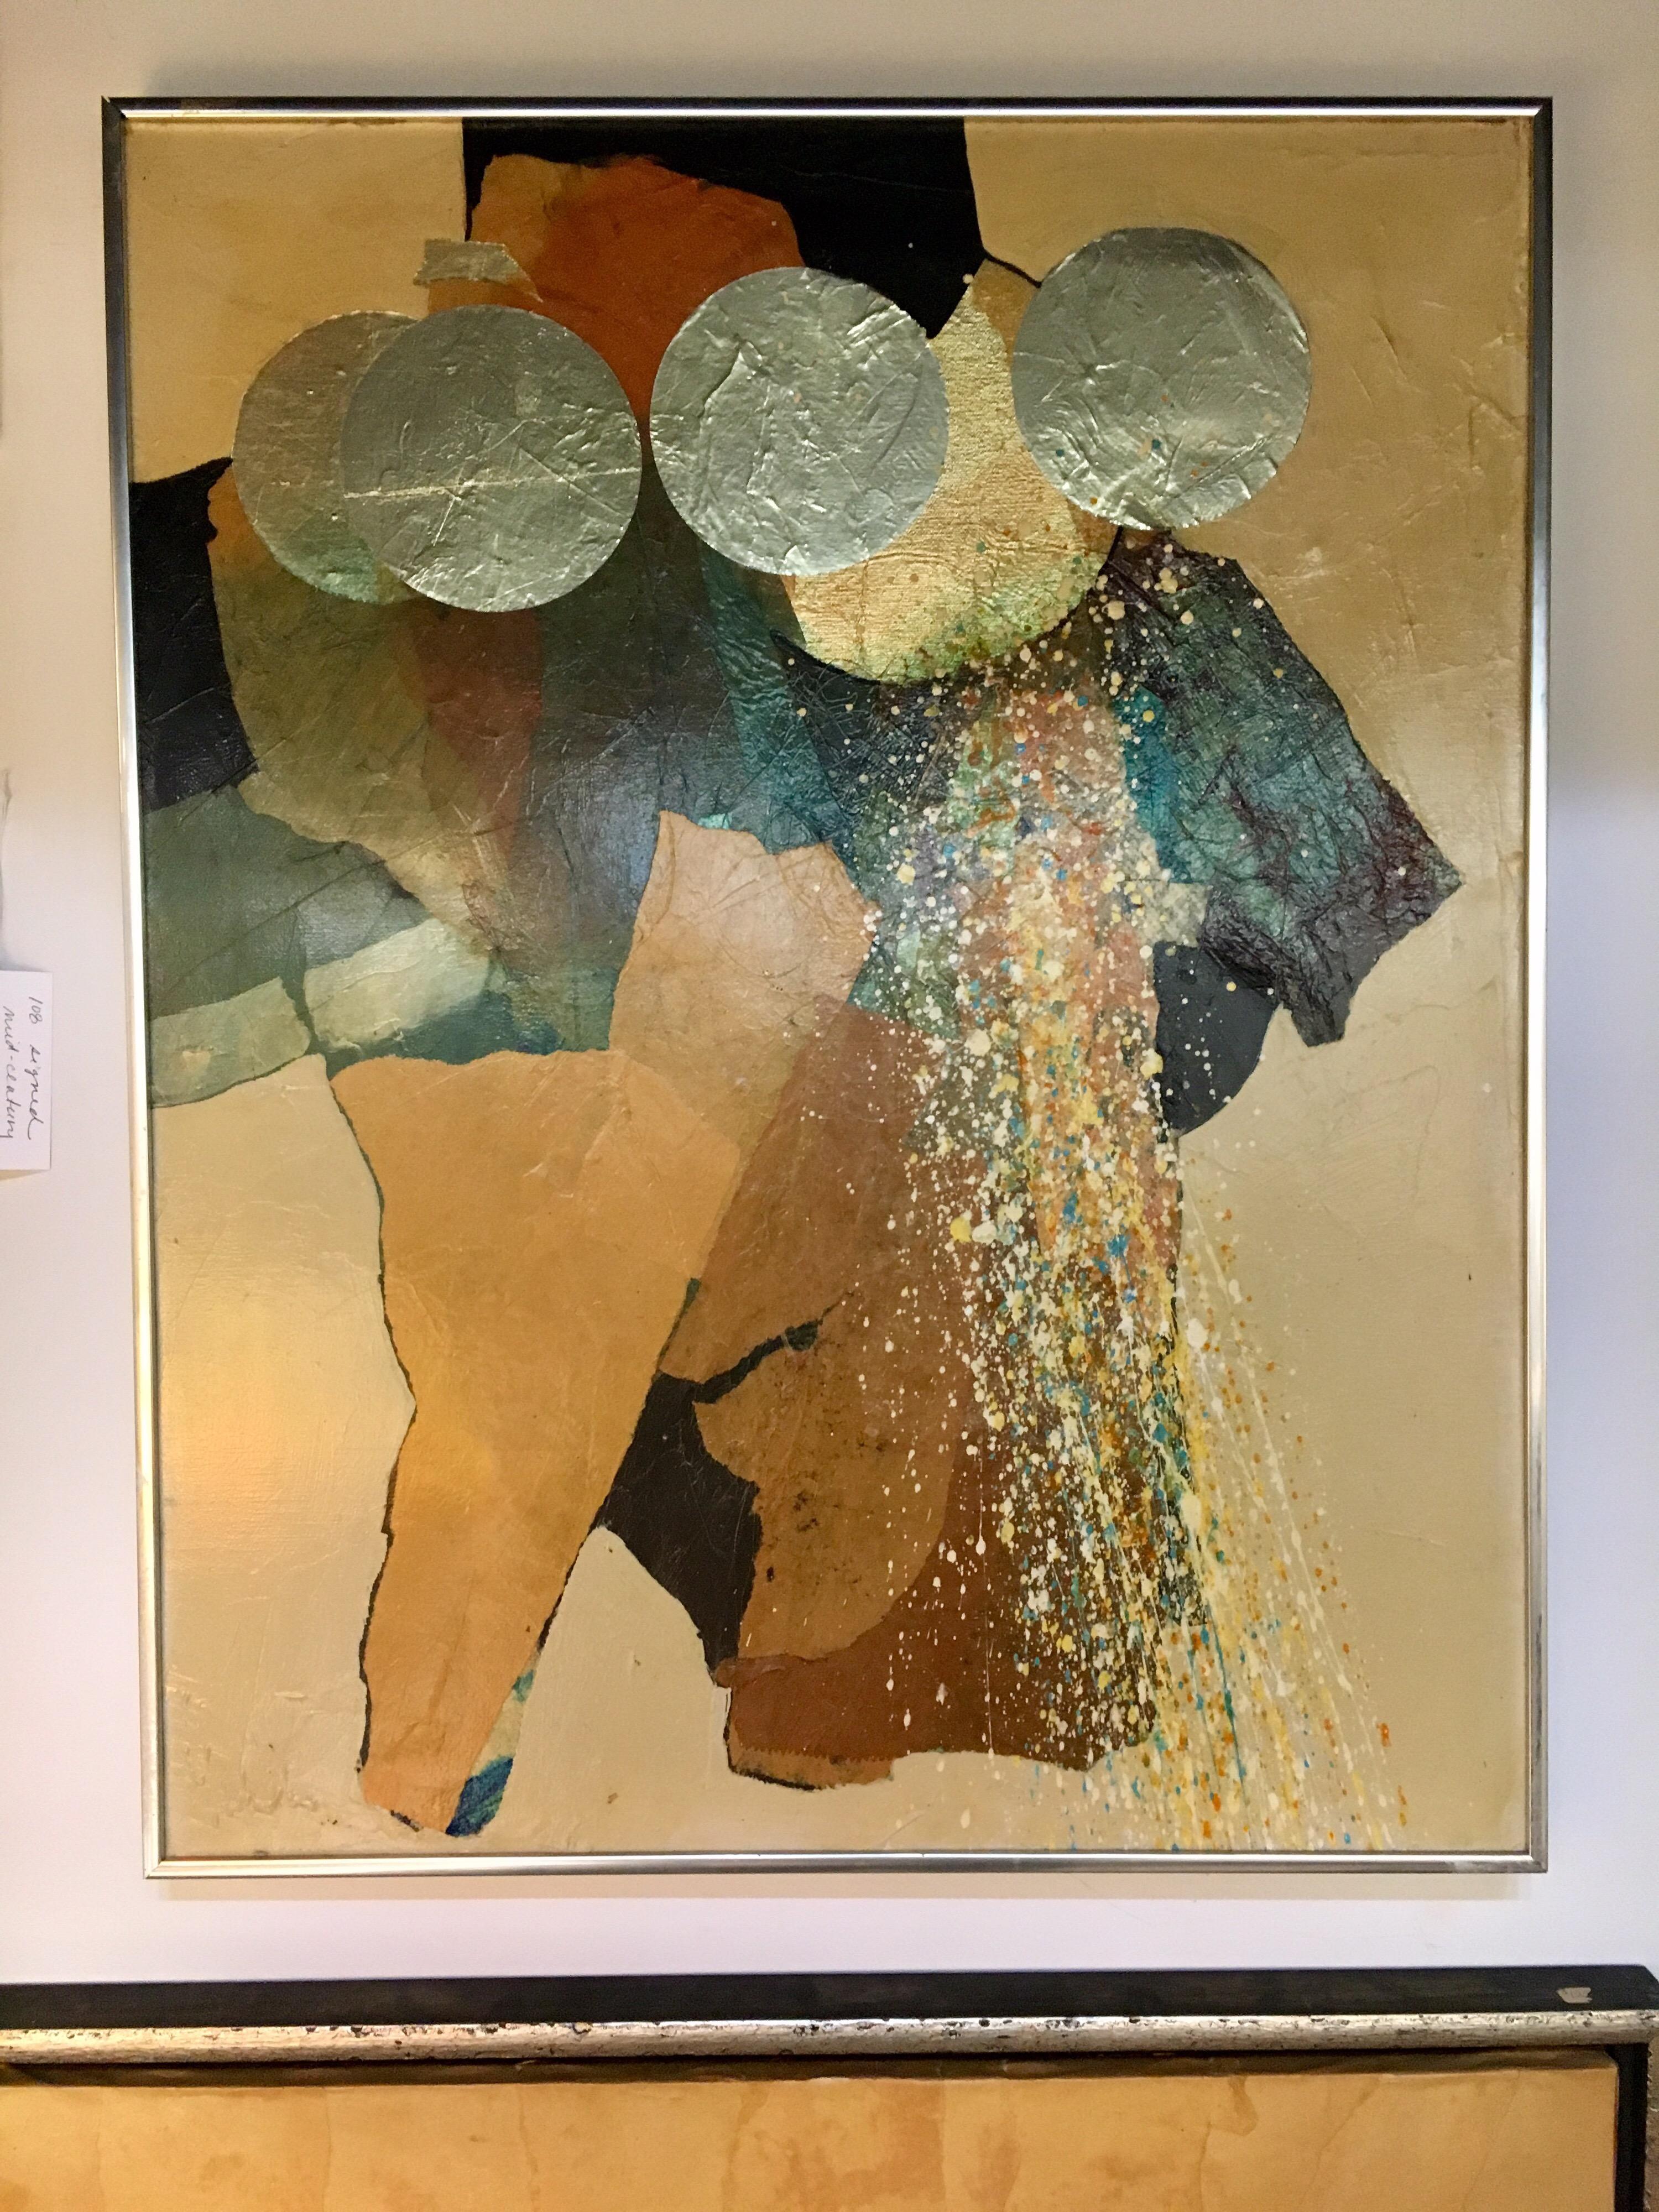 Part of a suite of four original mixed-media paintings. The artist's signature is on the lower part of the canvas but is illegible. We have been told that these original works of art hung at the Parsons School of Design in NYC for several years but